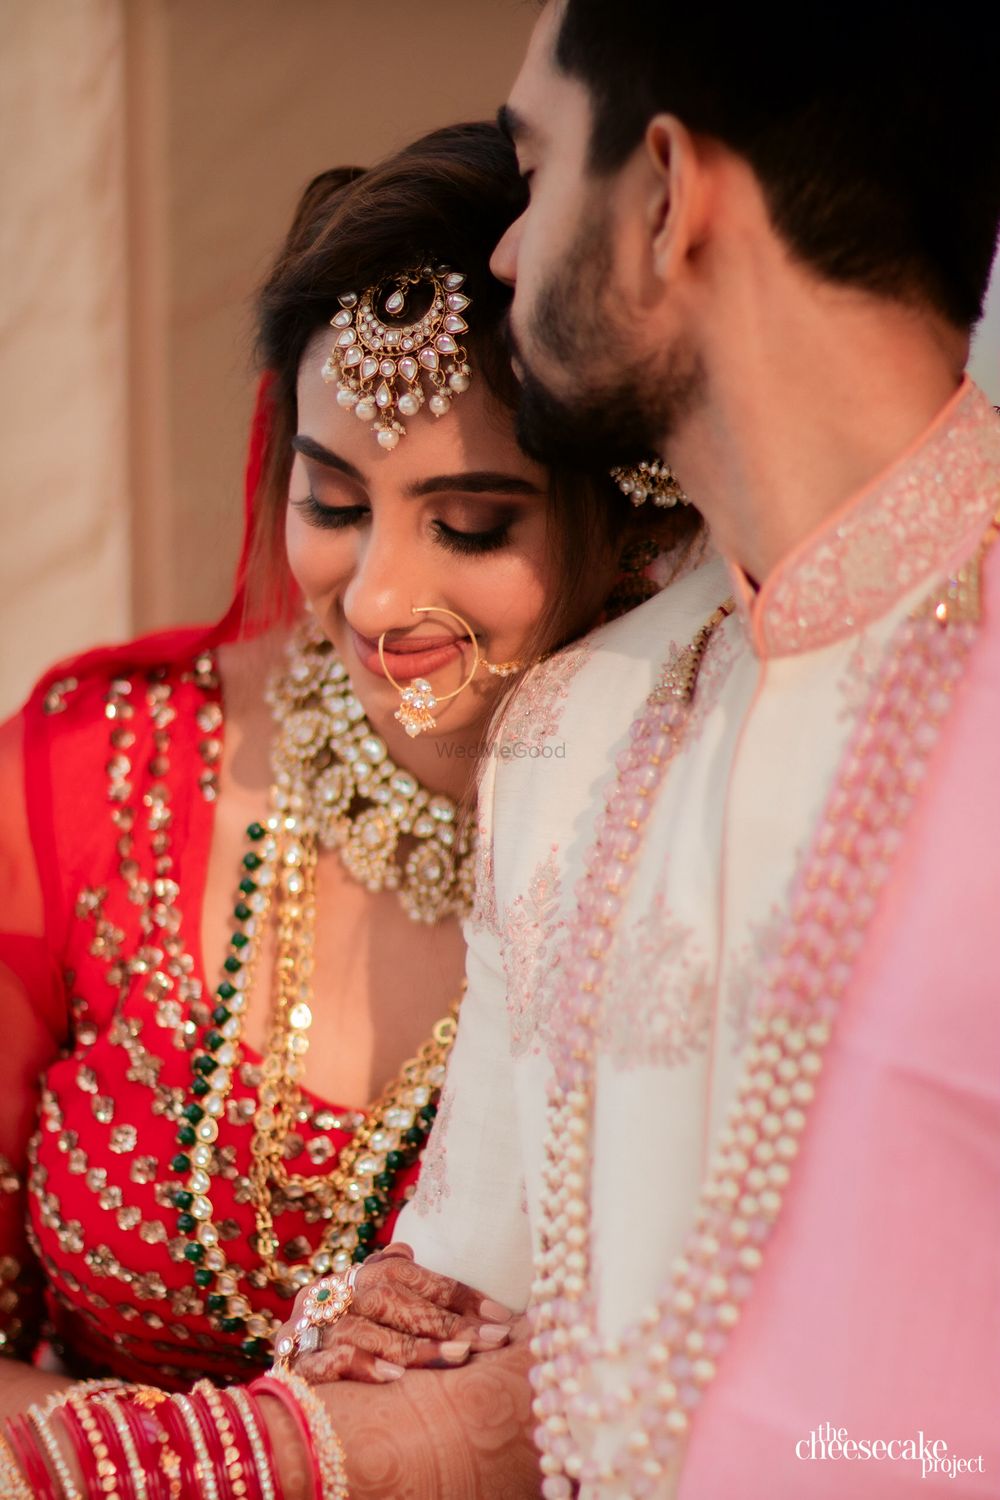 Photo From Brides - By Suman Bhagat The Makeup Artist